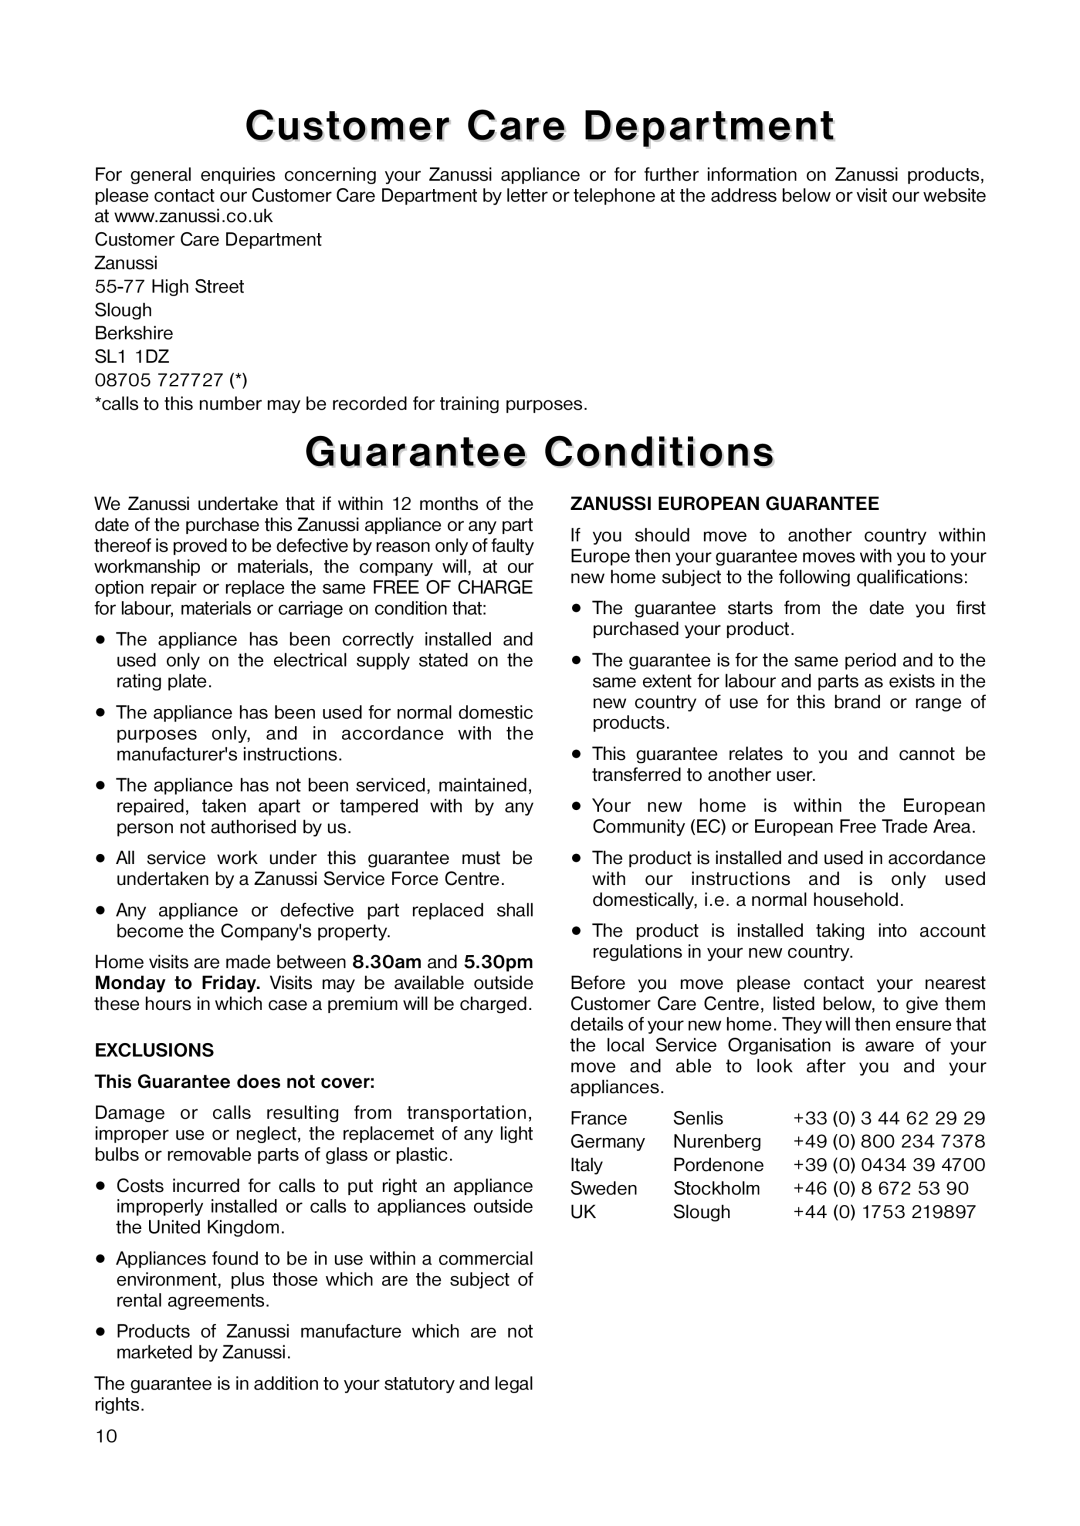 Zanussi ZCL 56 manual Customer Care Department, Guarantee Conditions, EXCLUSIONS This Guarantee does not cover 